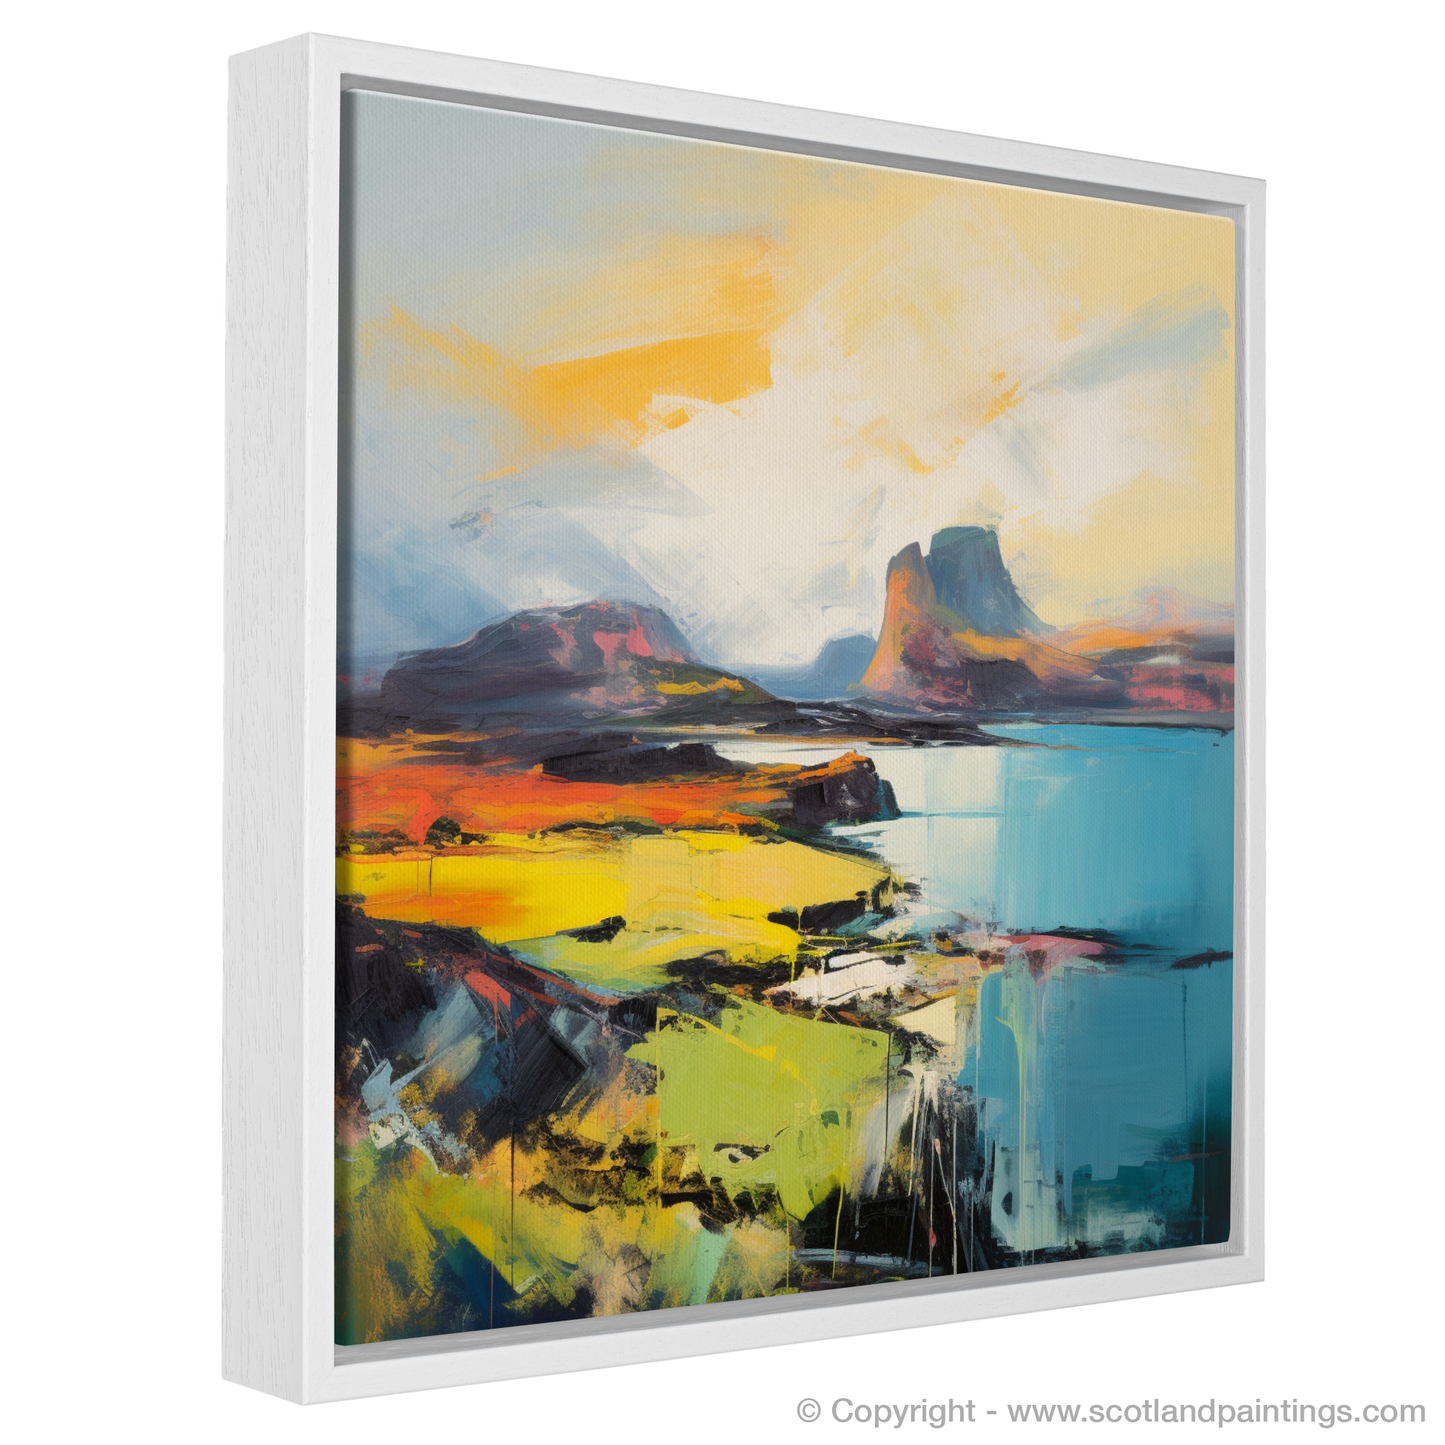 Isle of Skye Impression: An Abstract Ode to Scottish Wilderness